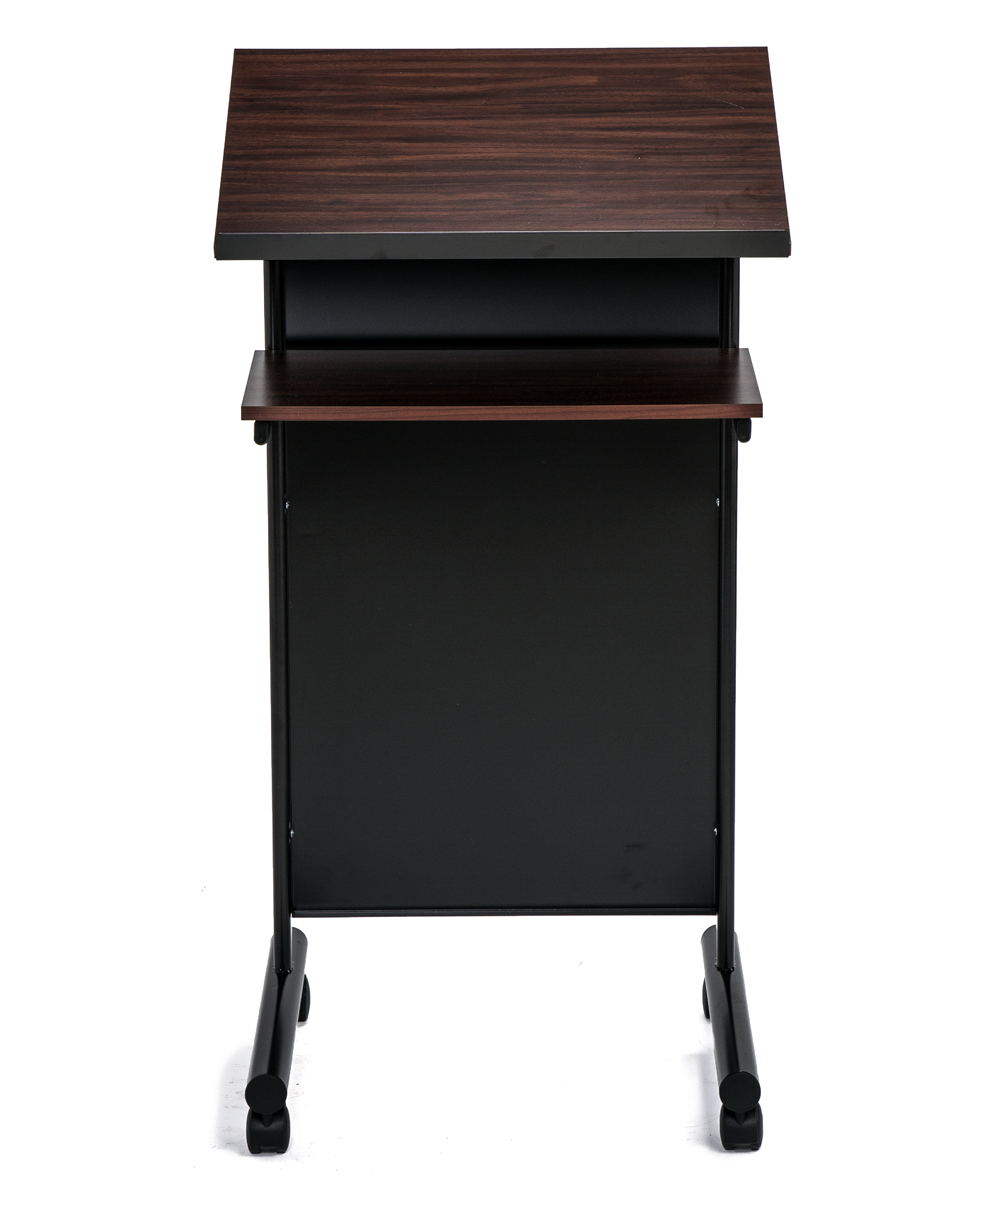 Wheeled Lectern with Storage Shelf - Cherry/Black - Compact Standing Desk for Reading - Laptop Stand